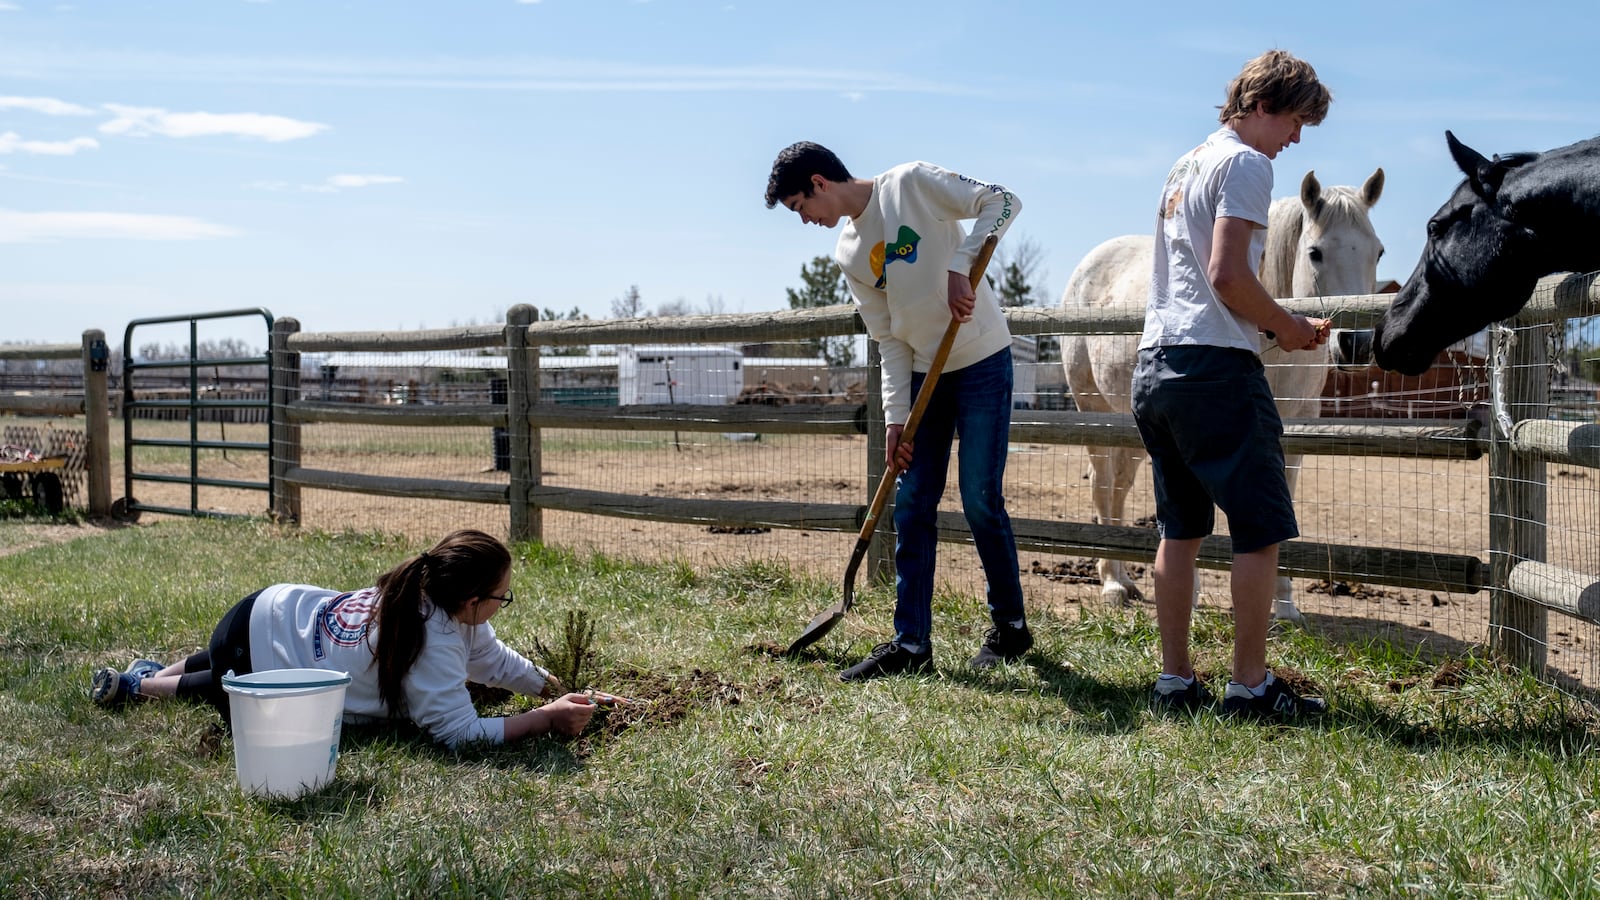 Two high school students work on planting spruce trees in a field as a third feeds grass to a horse standing behind a wooden fence.